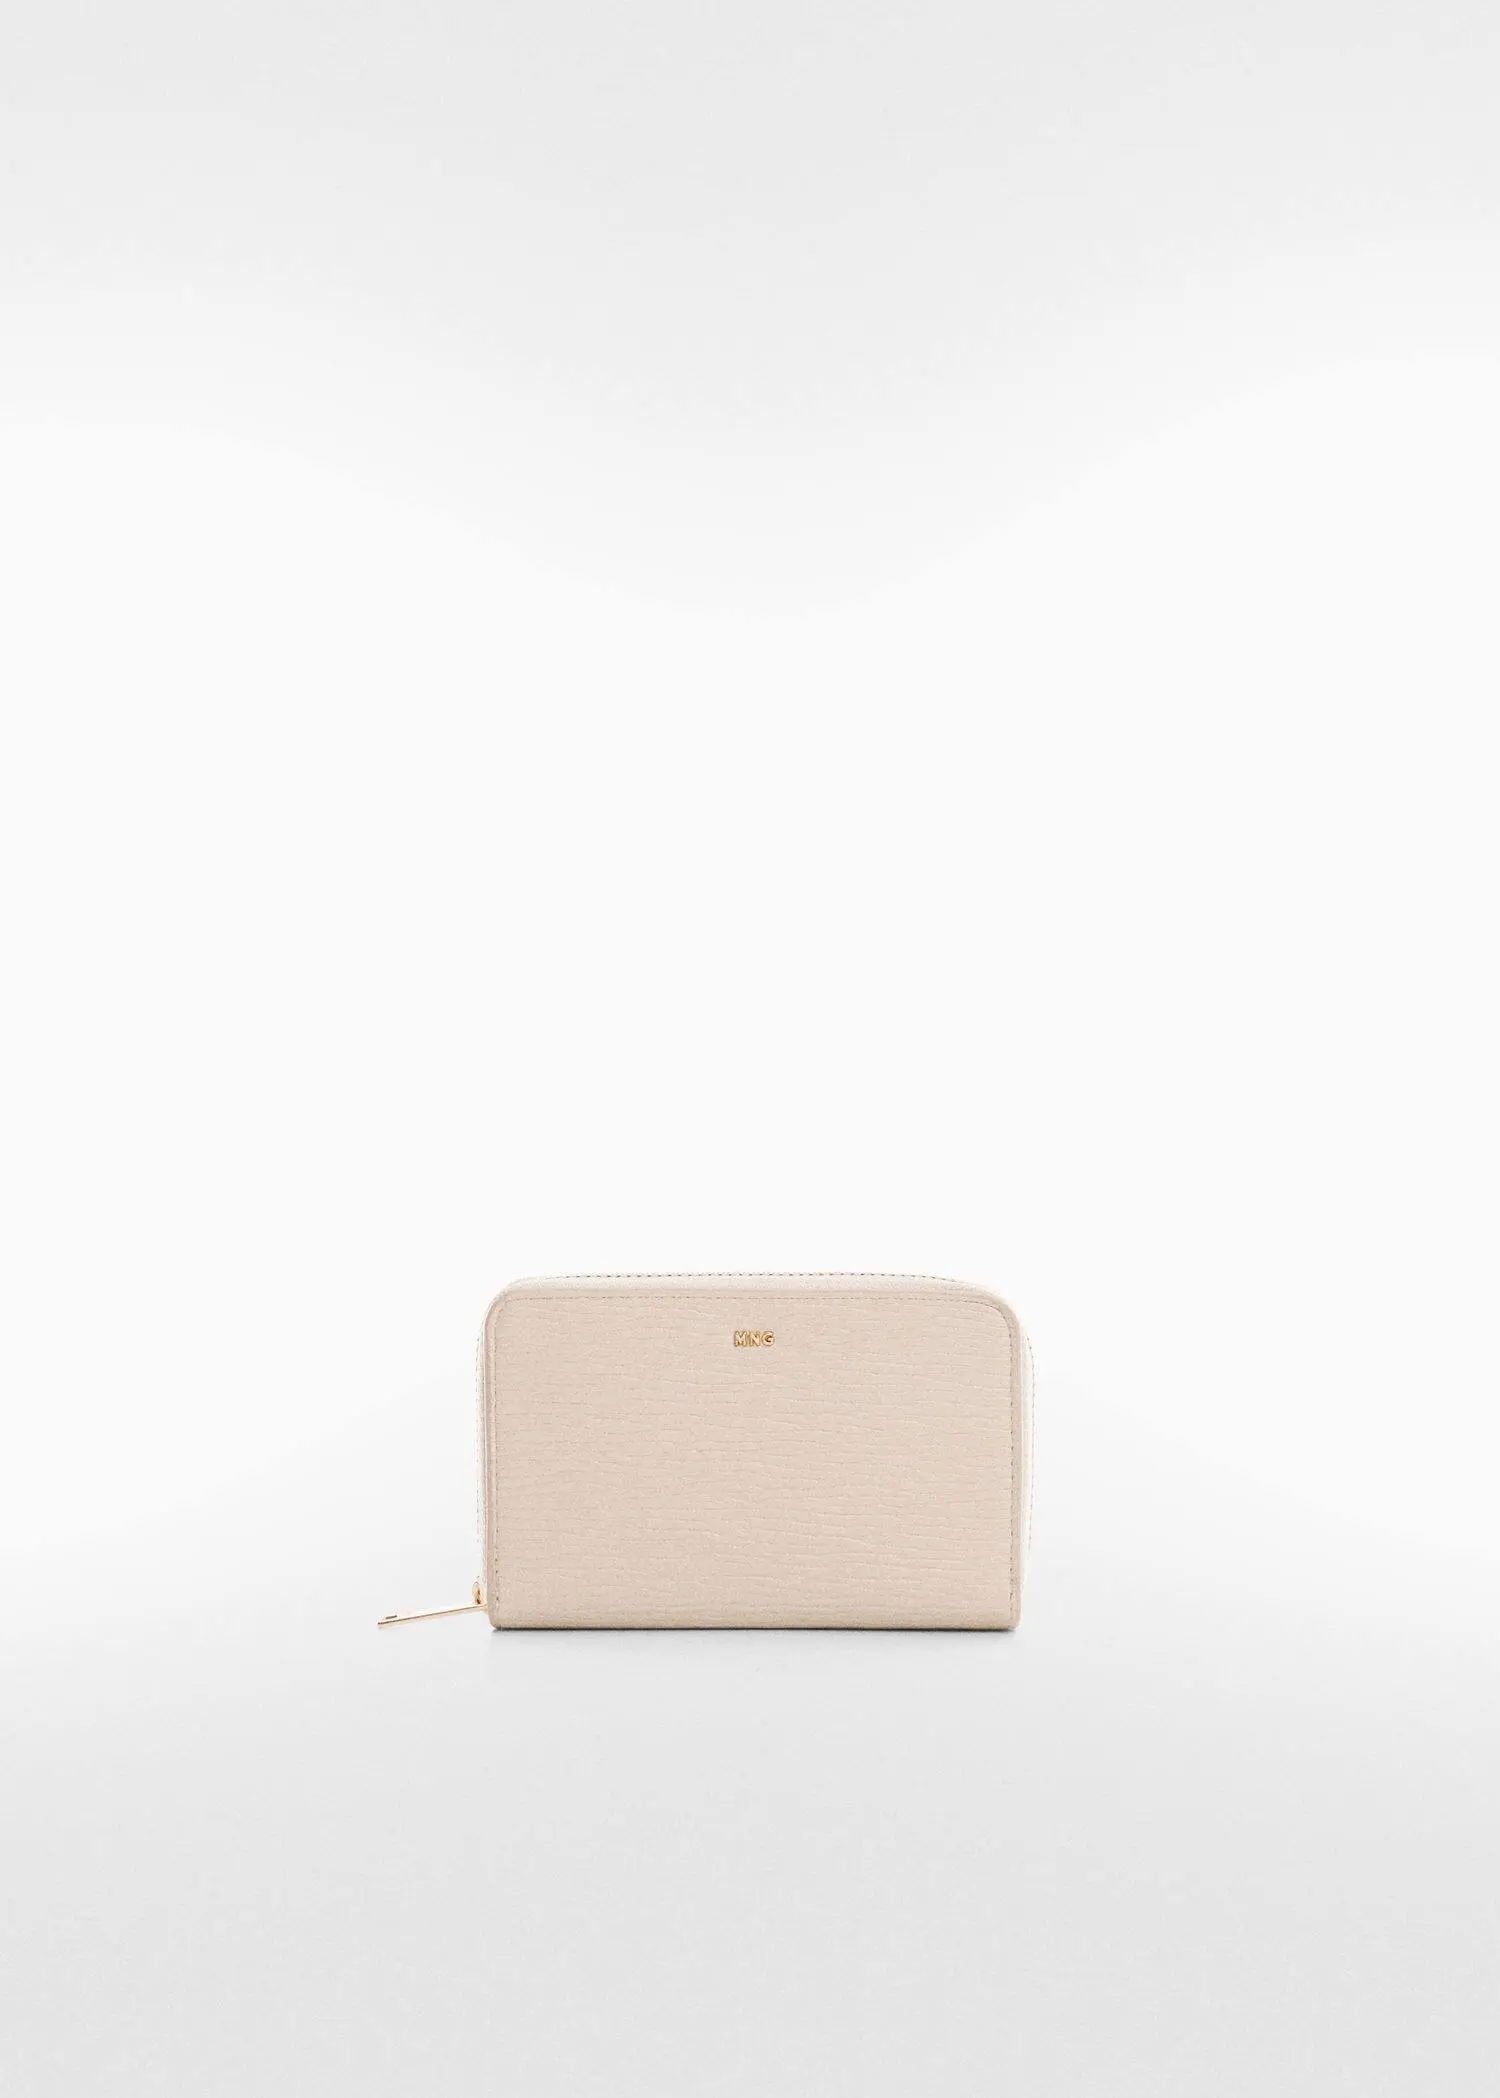 Mango Textured wallet with embossed logo. 1